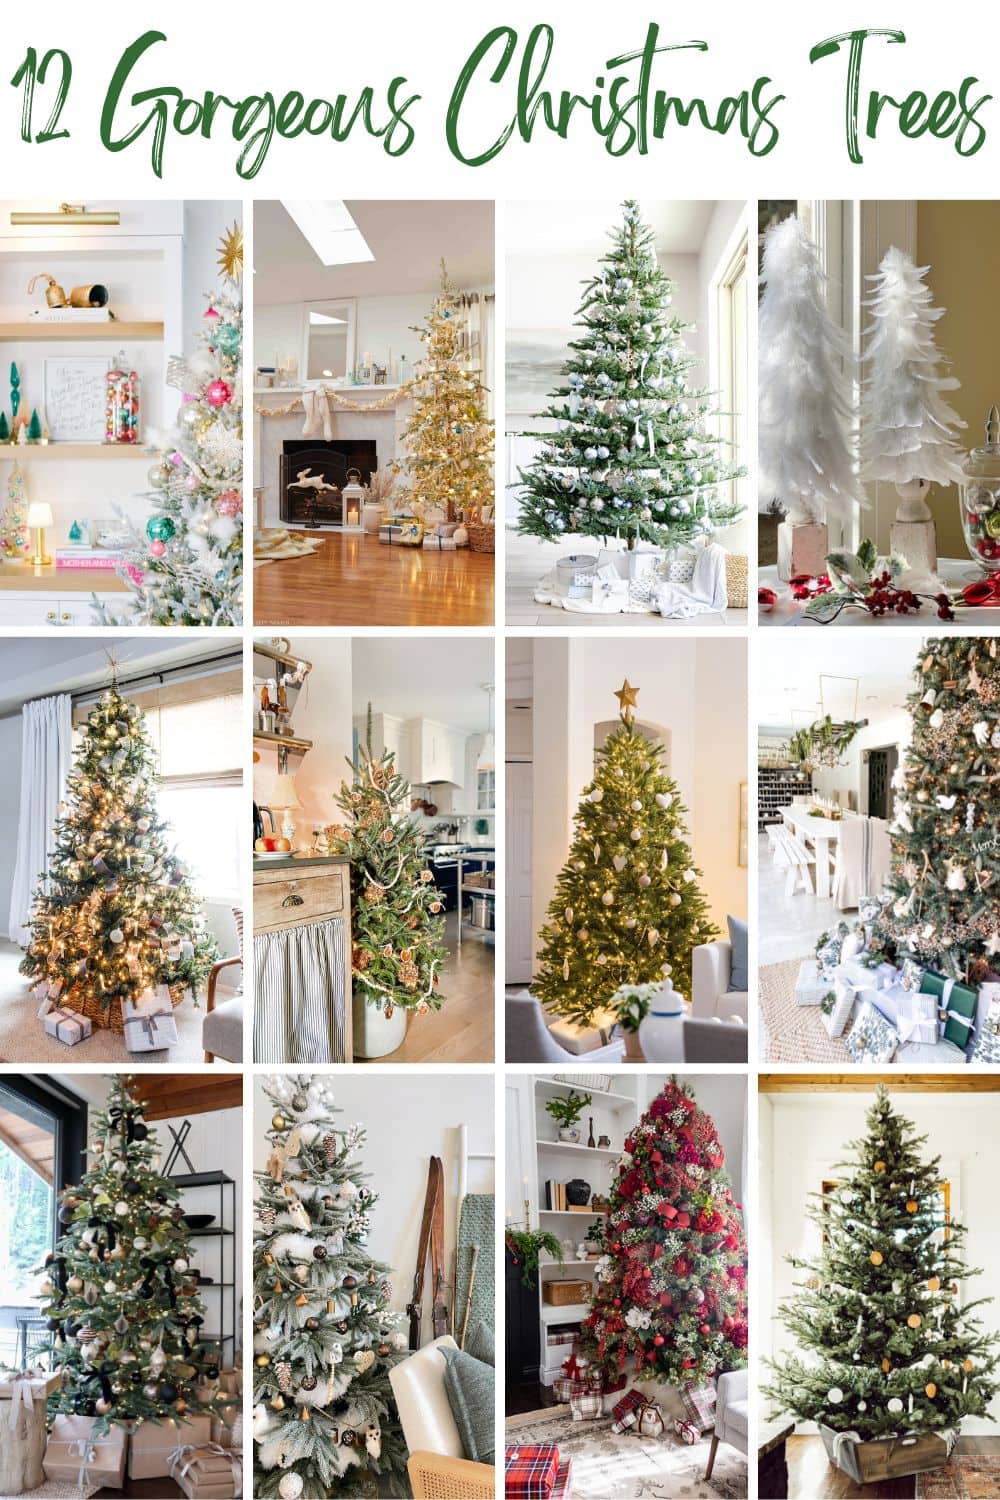 How to Decorate a Kitchen Christmas Tree All Natural